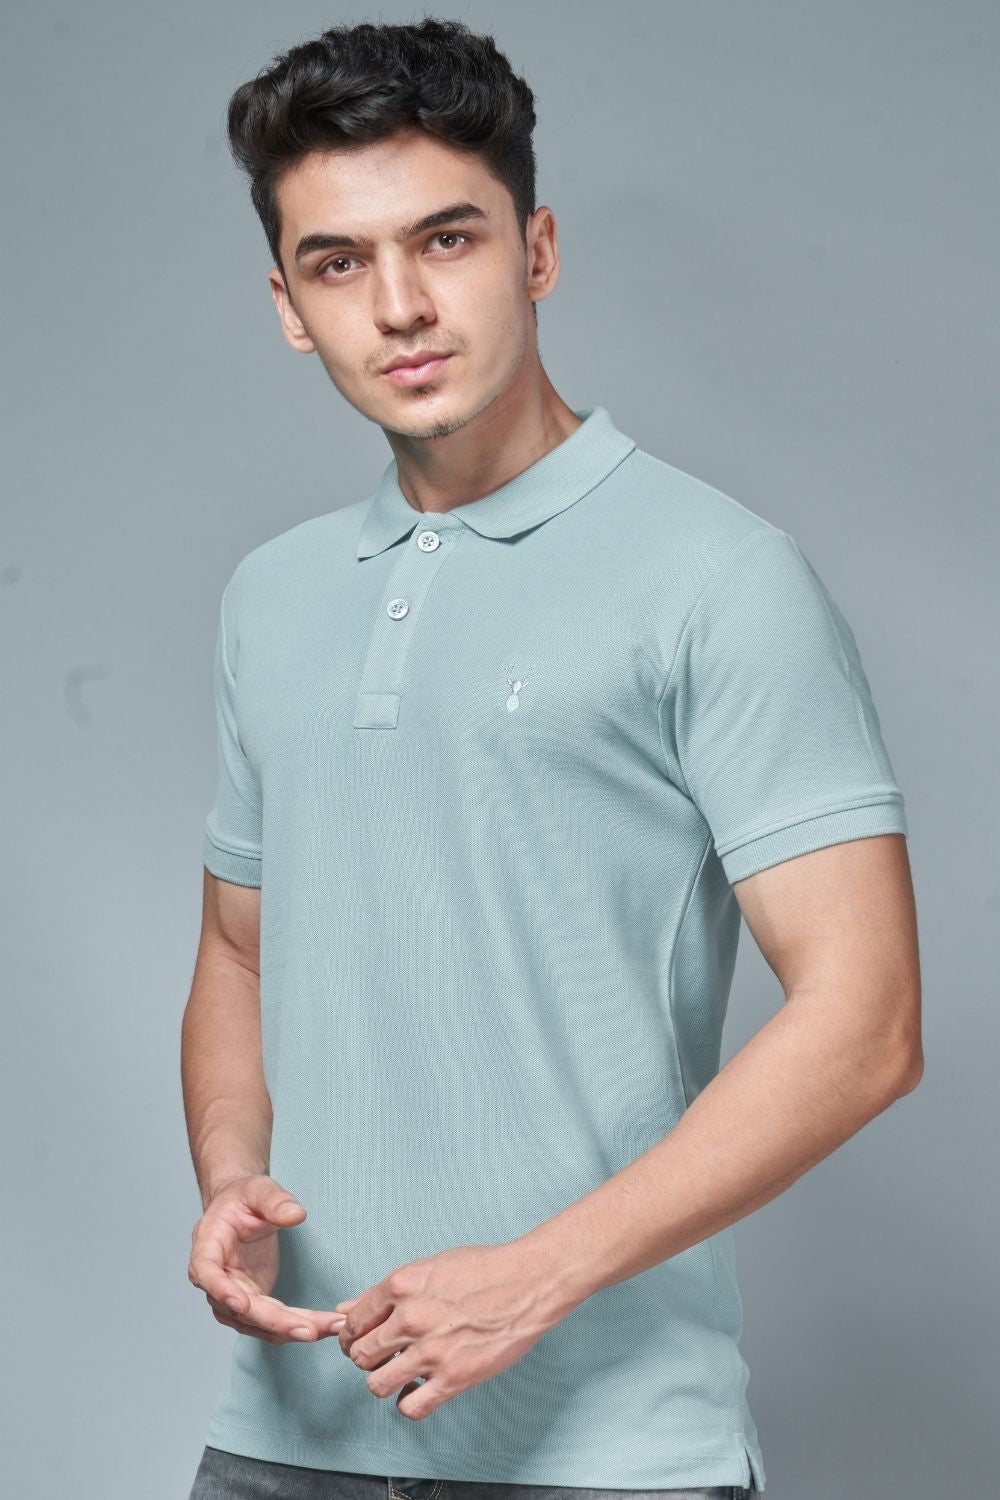 A model wearing Sky light colored, identity Polo T-shirts for men with collar and half sleeves.